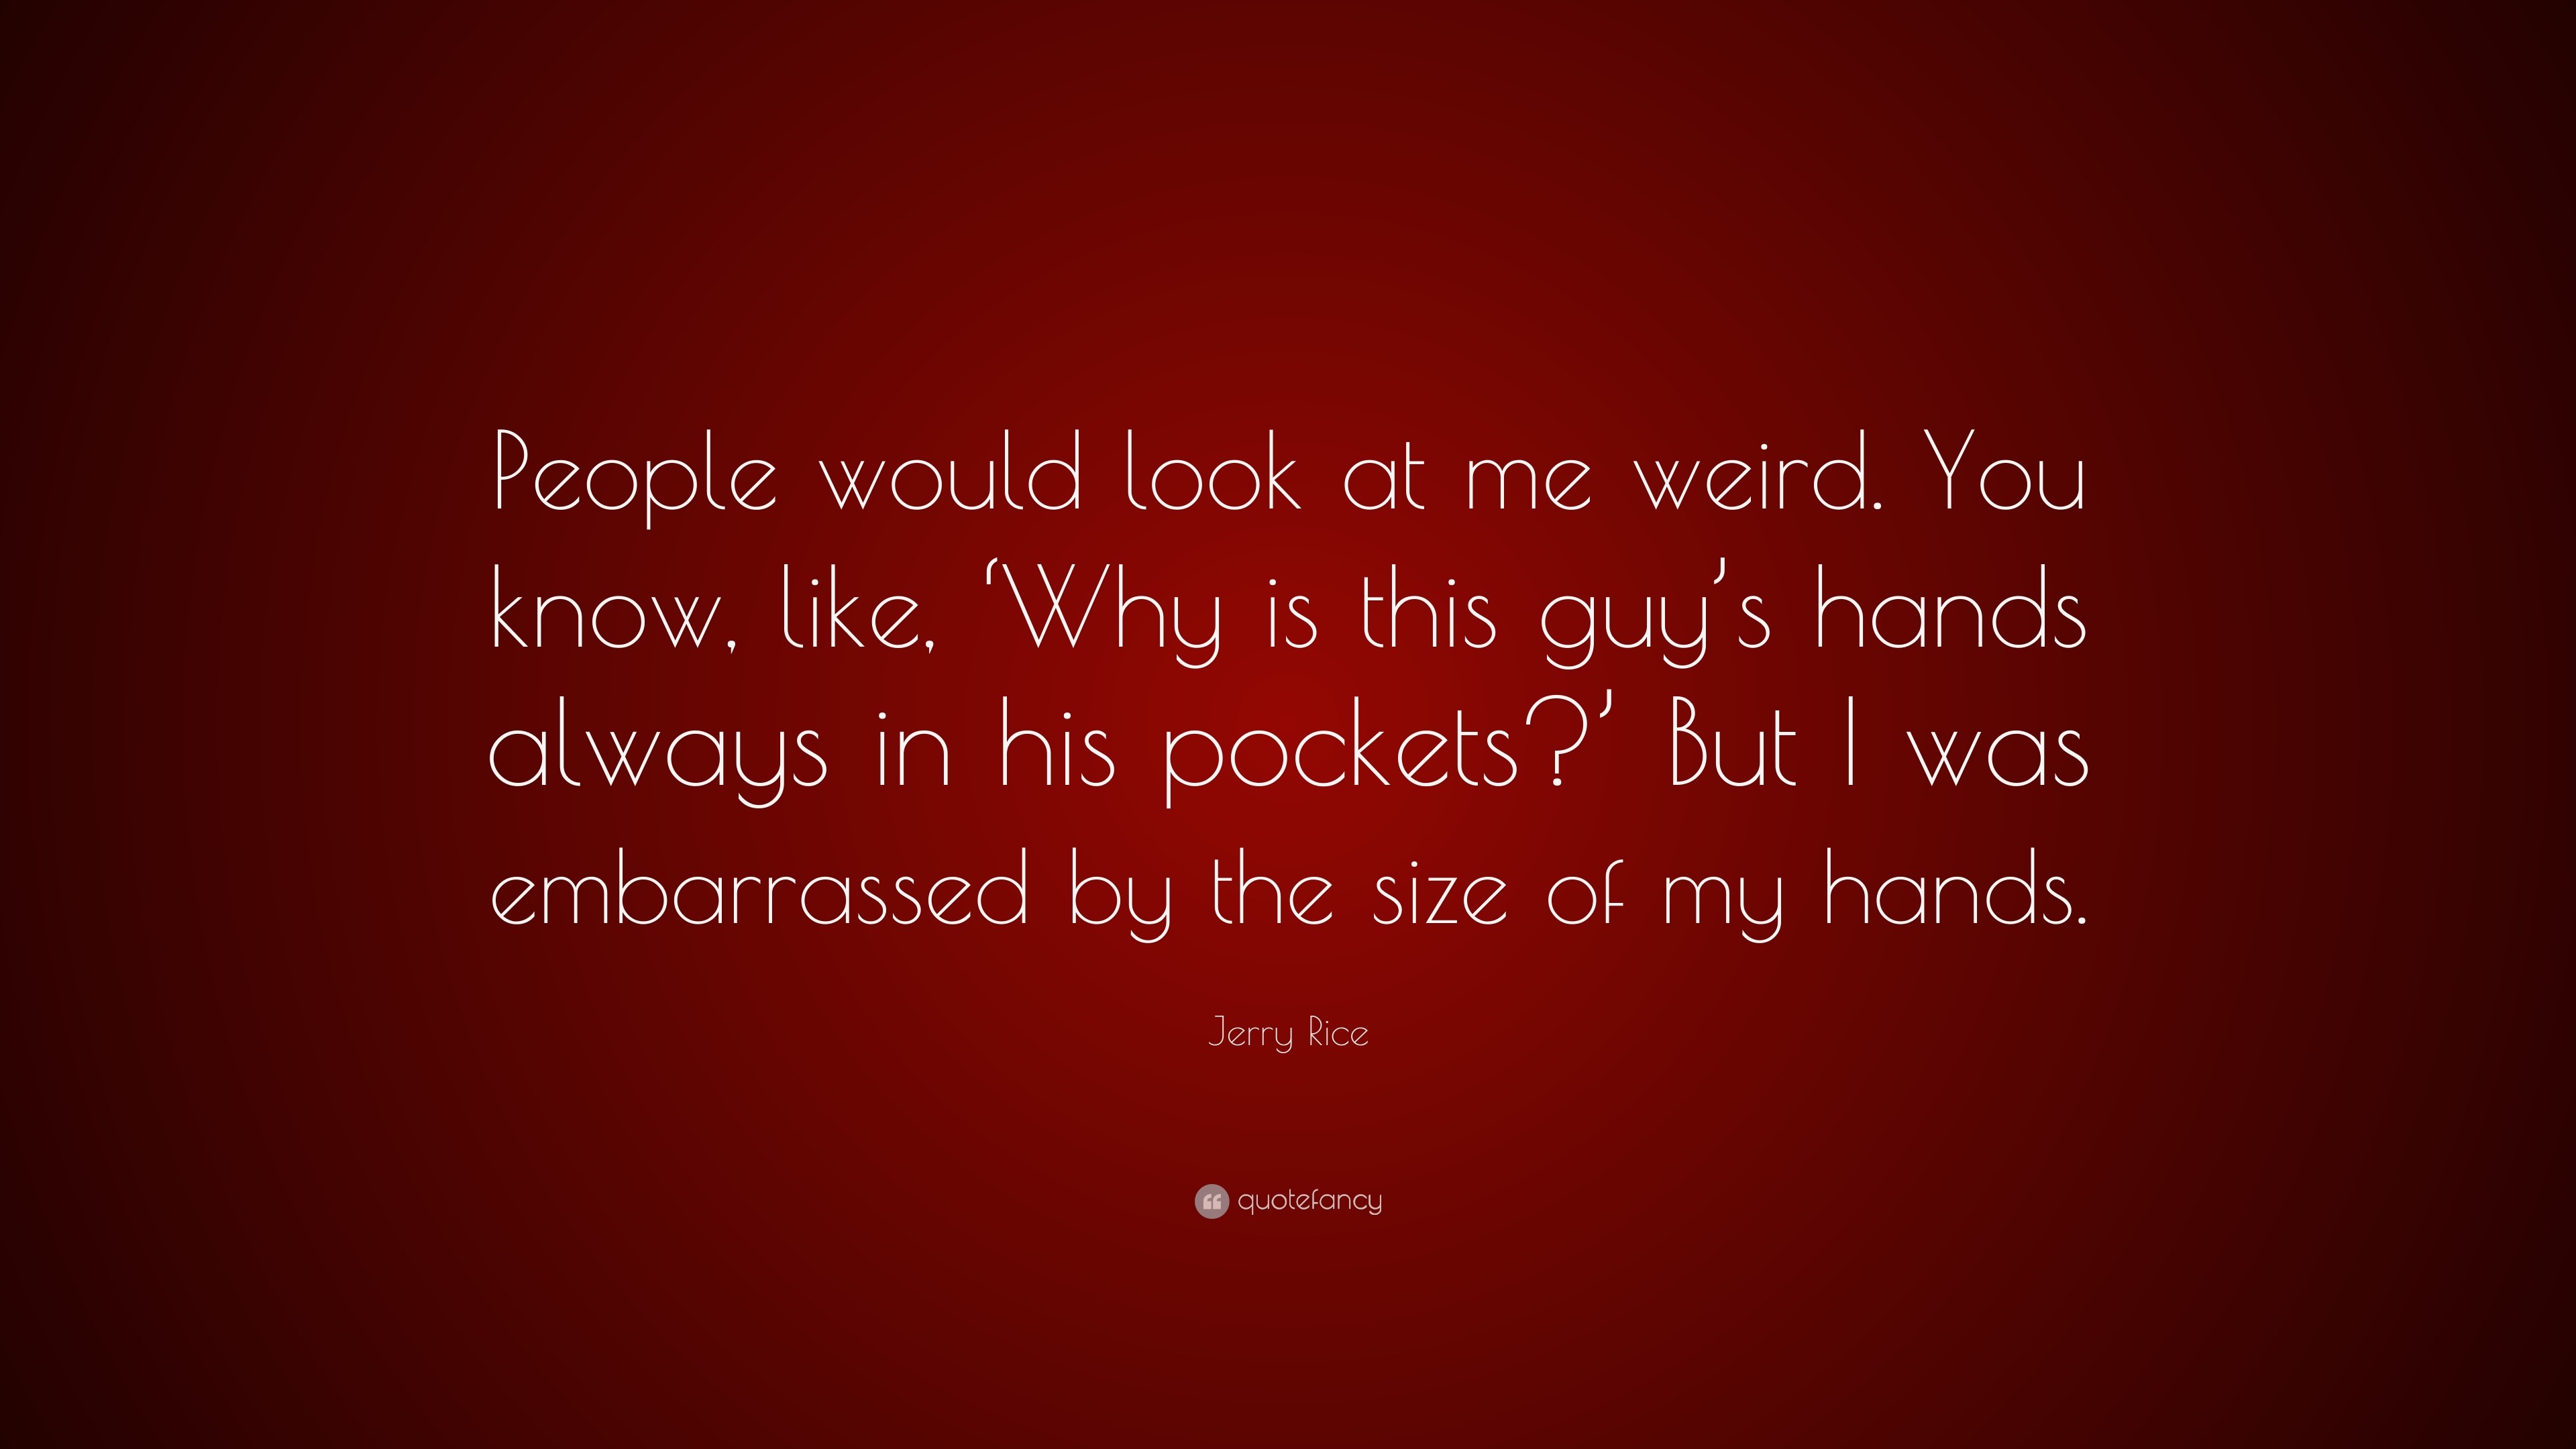 Jerry Rice Quote: “People would look at me weird. You know, like